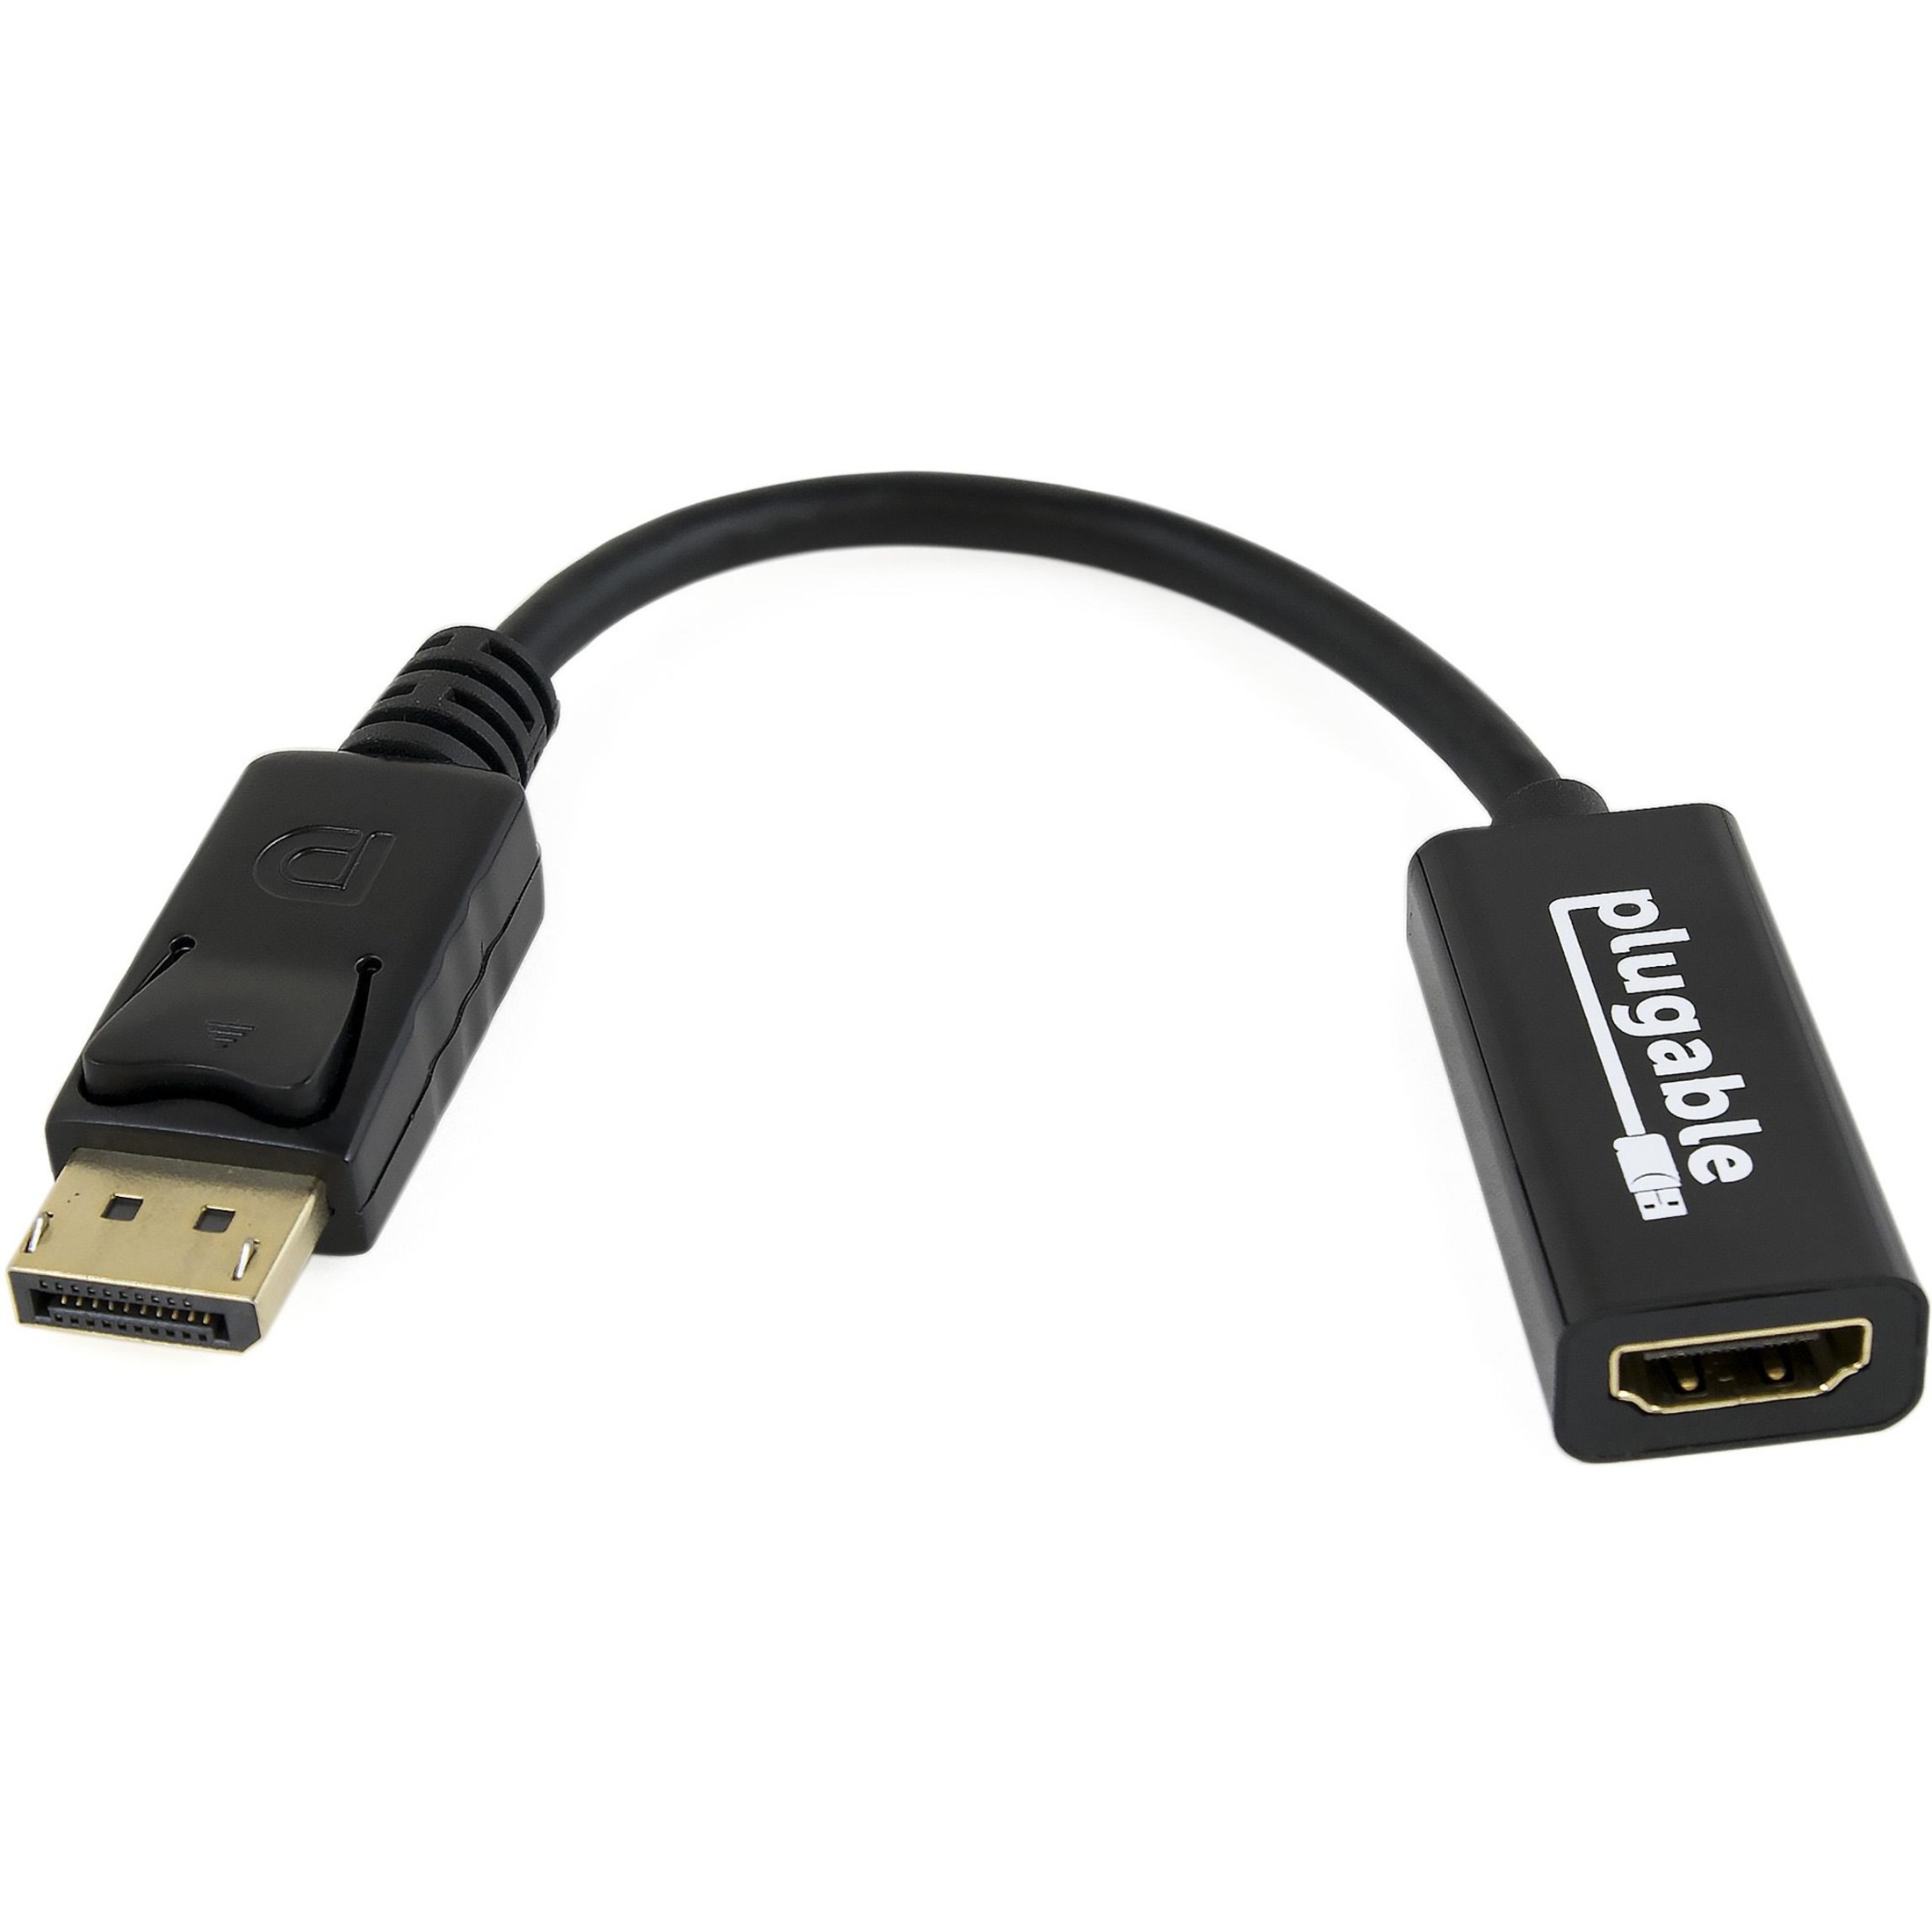 Plugable DisplayPort to HDMI Passive Adapter (Supports Windows and Linux Systems and Displays up to 4K UHD 3840x2160@30Hz) - image 1 of 5